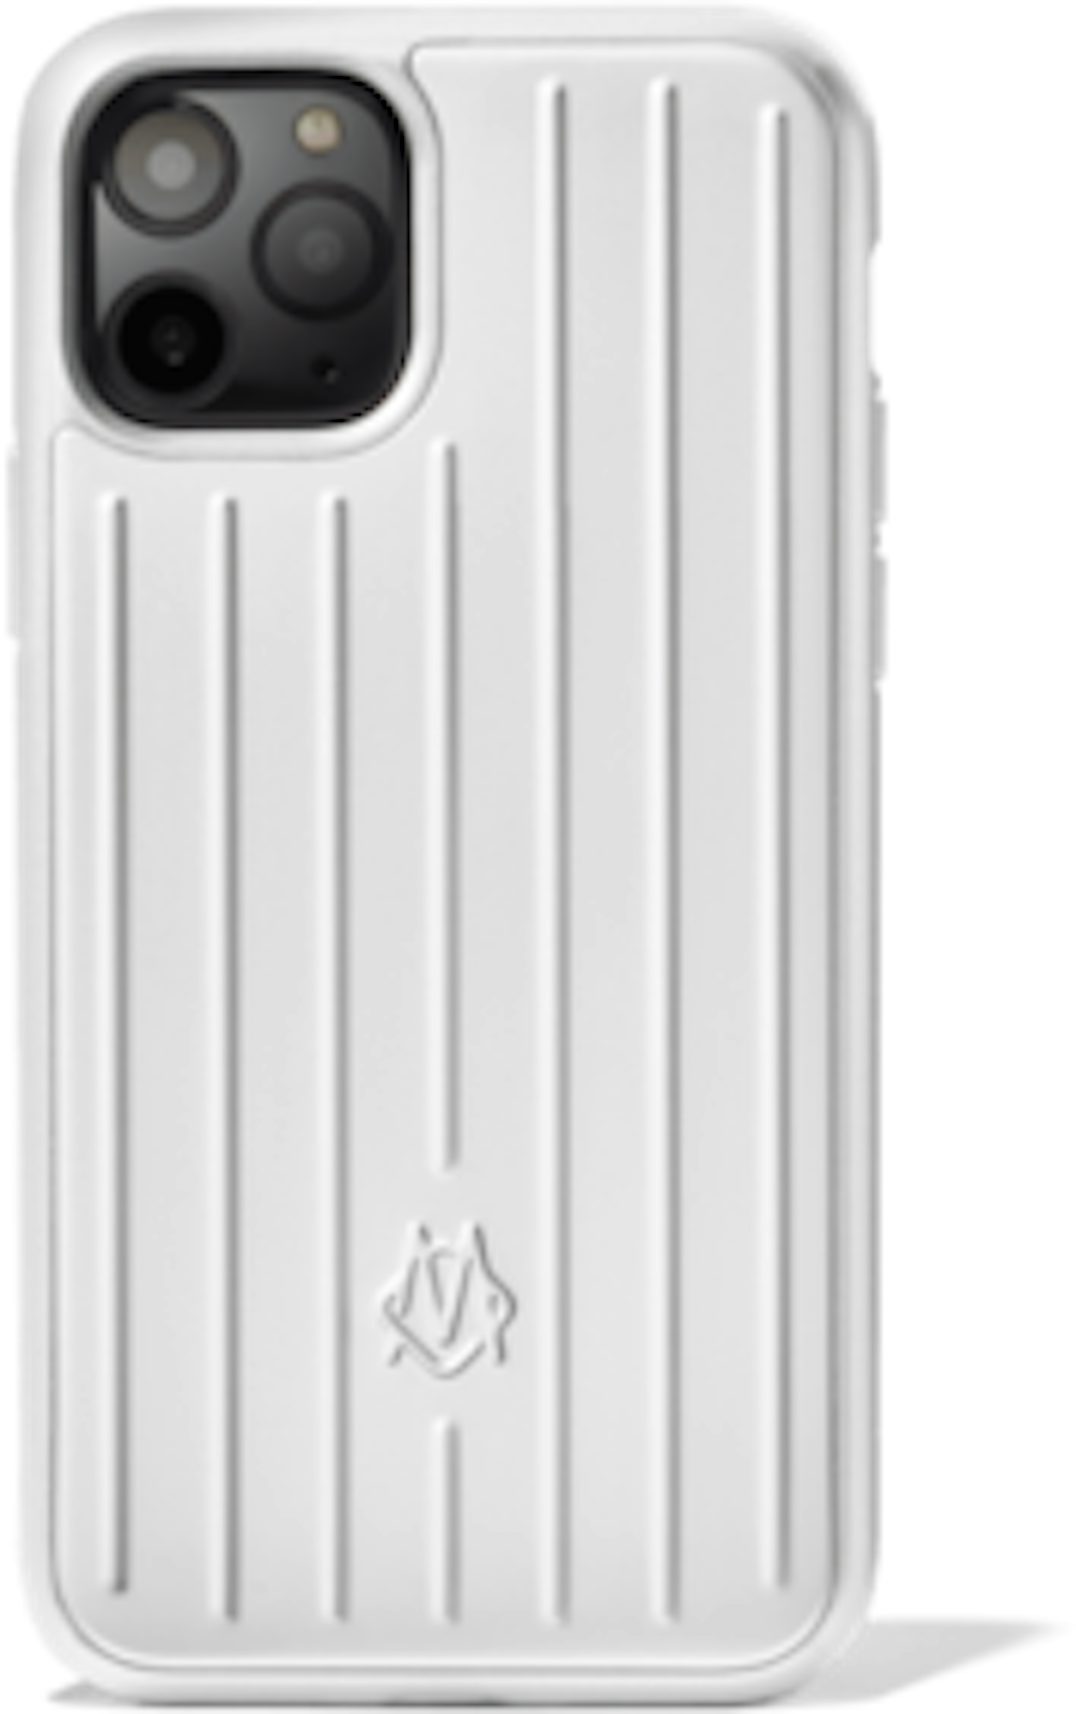 Rimowa Aluminum Groove Case for iPhone 11 Pro Max in Polycarbonate